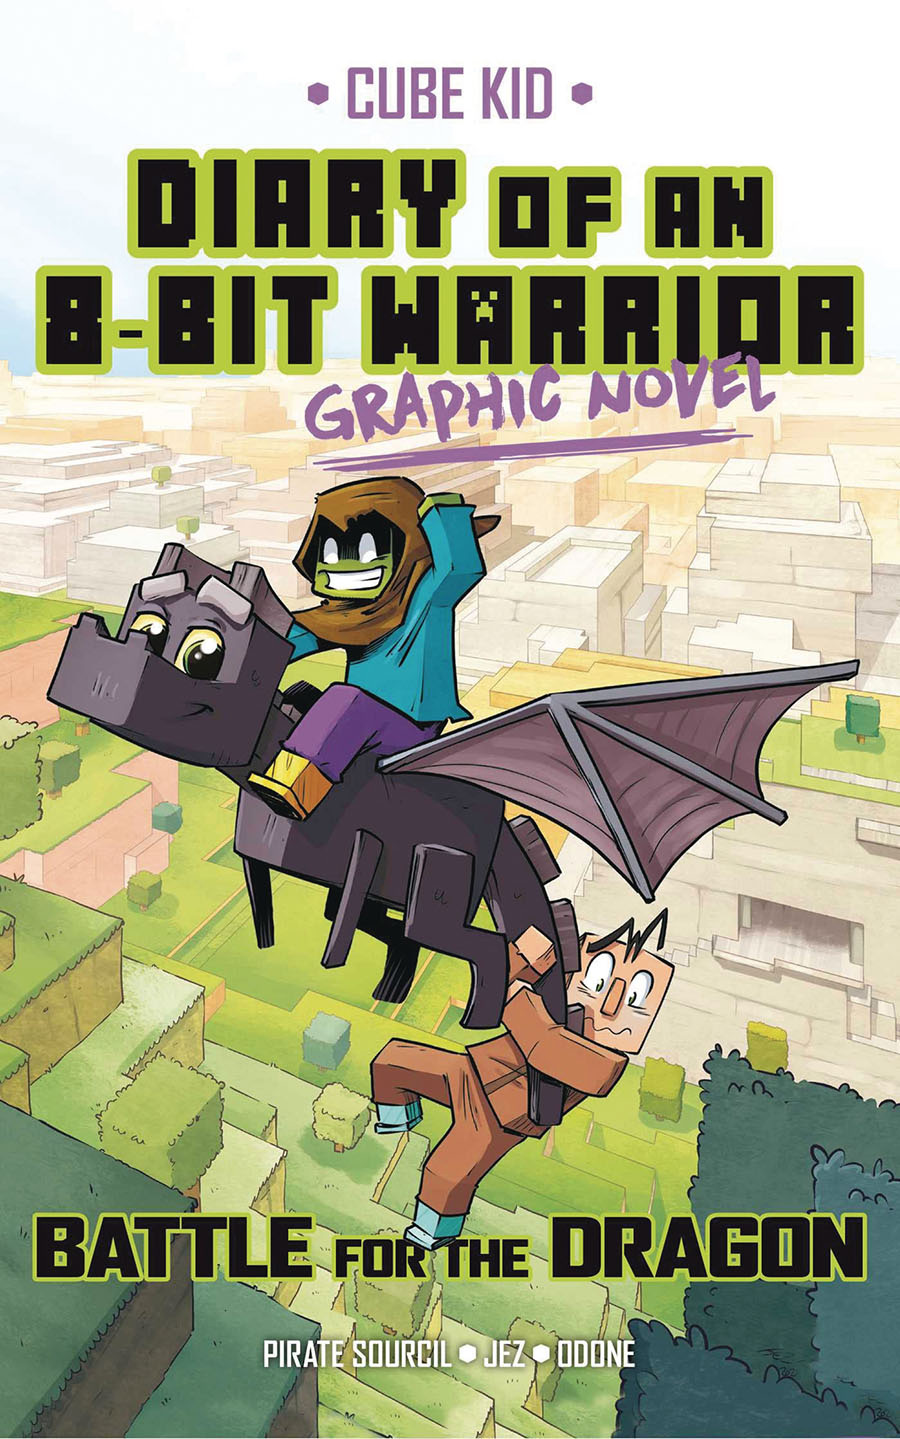 Diary Of An 8-Bit Warrior Graphic Novel Vol 4 Battle For The Dragon TP